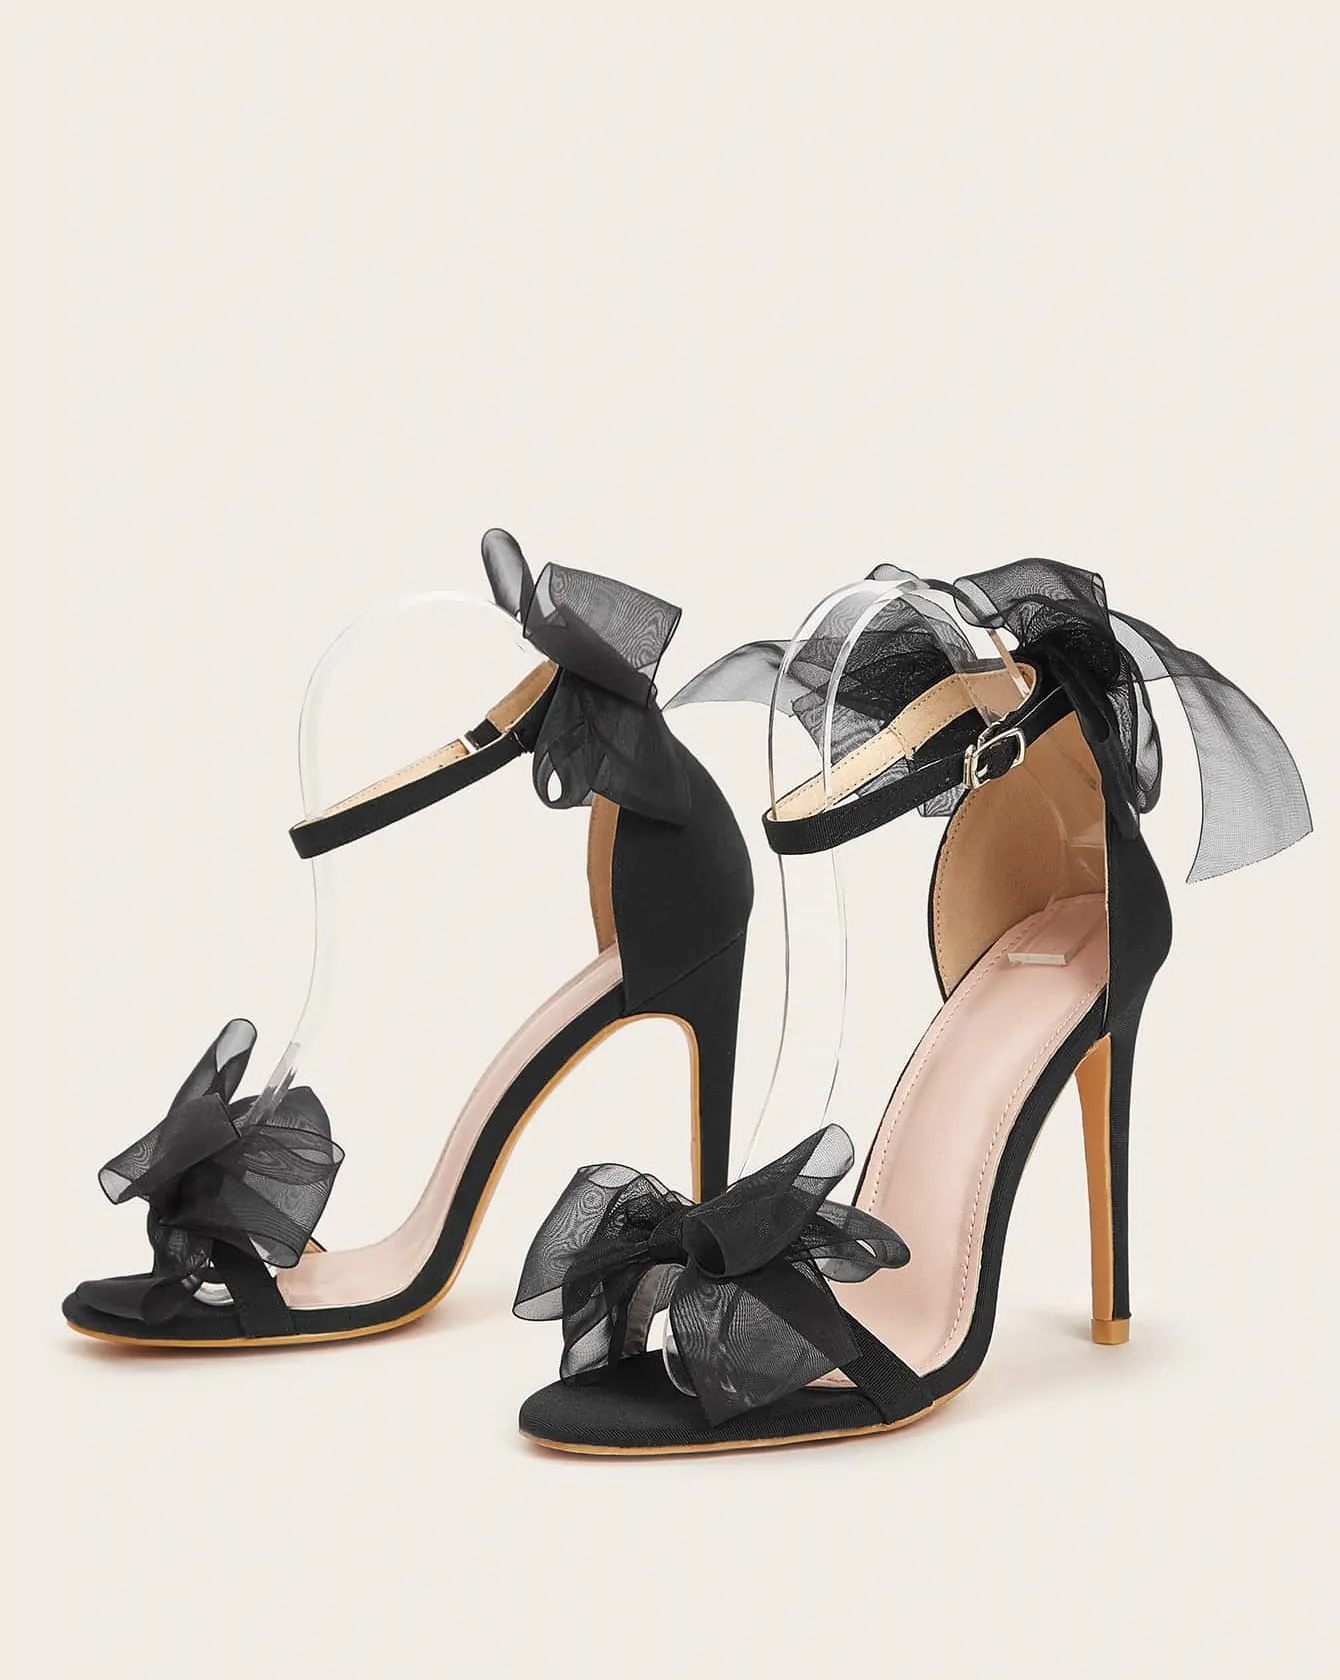 Wedding Sandals Satin Shoe Face Round Head Fine Heel Shoe Large Size Fish Mouth Lace Bow Heels